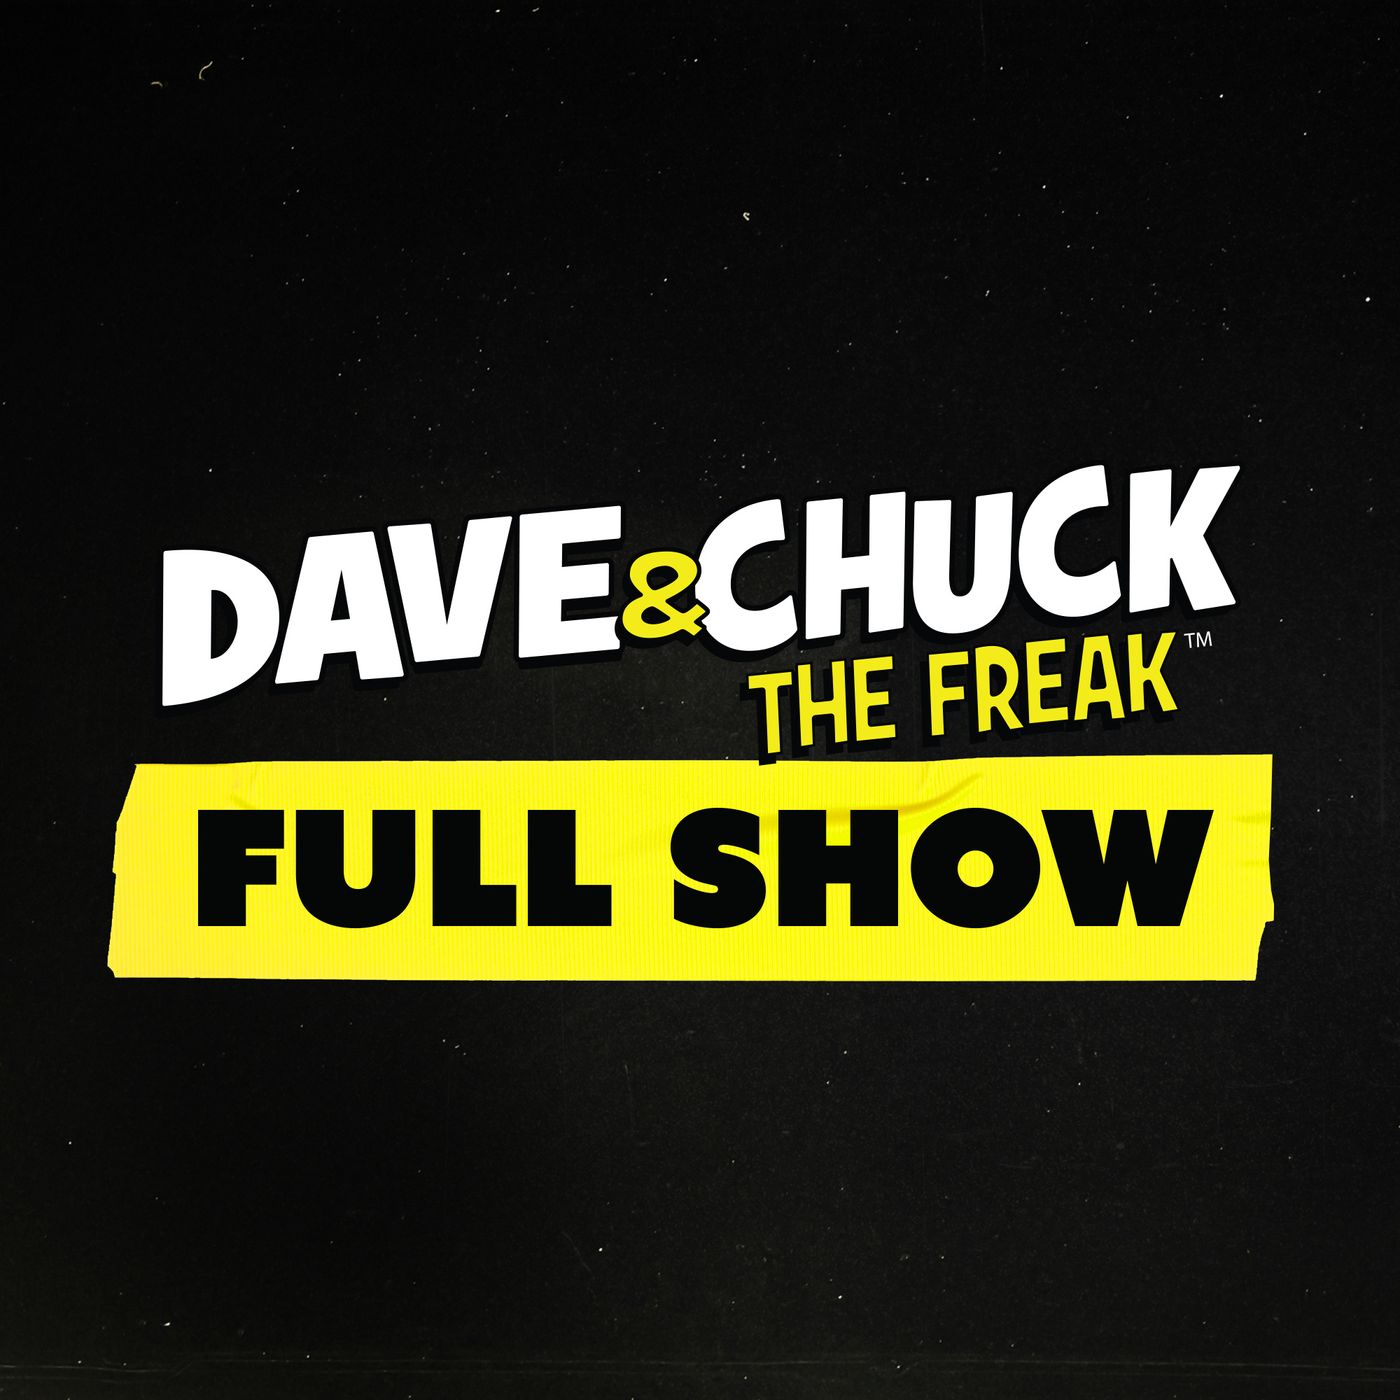 Wednesday, May 24th 2023 Dave & Chuck the Freak Full Show